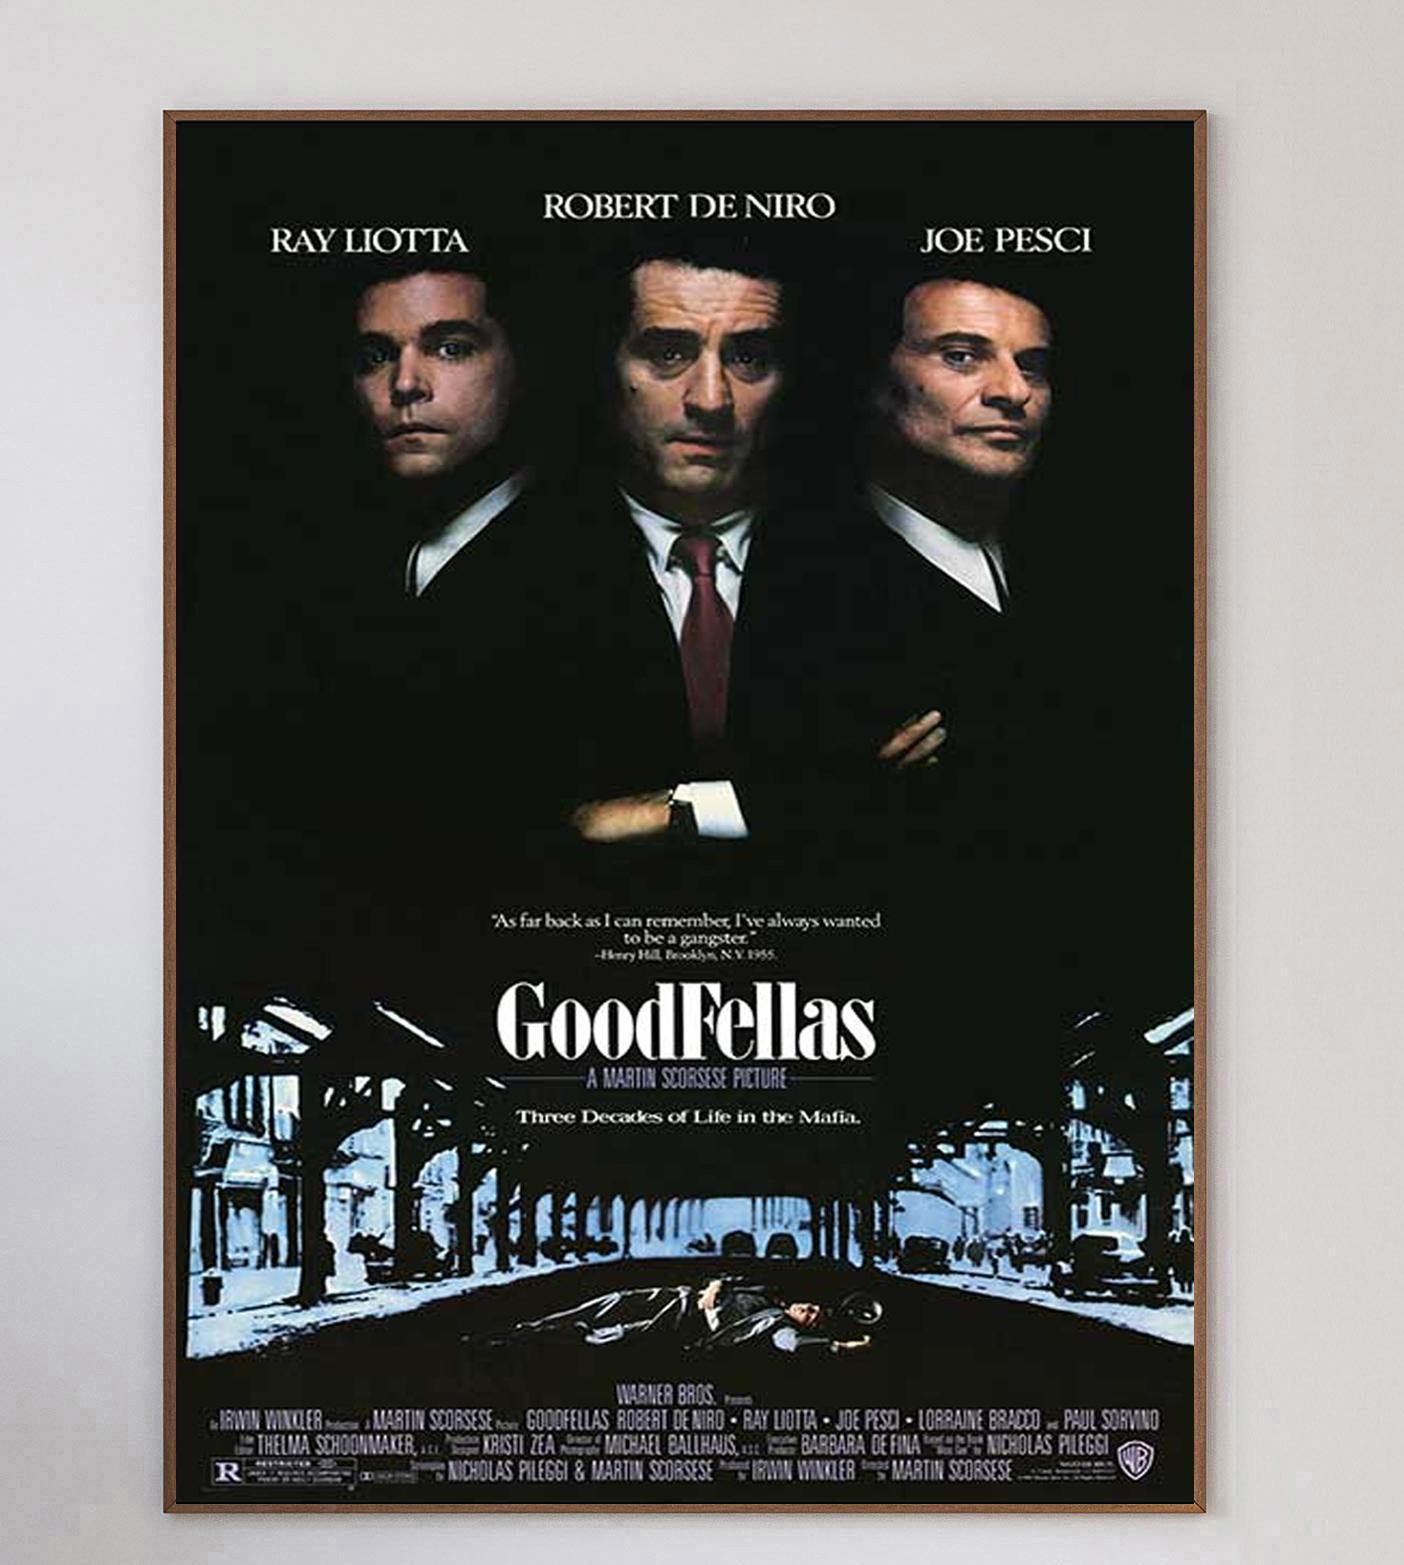 An iconic poster for an iconic film. Martin Scorsese's classic 